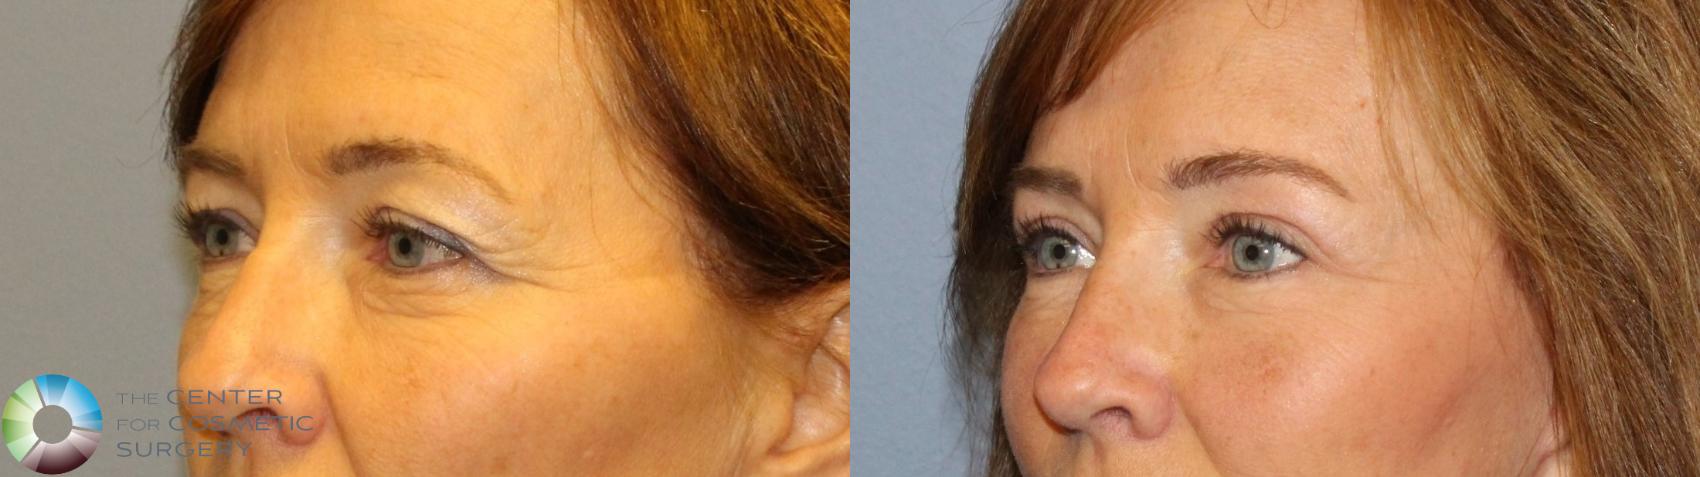 Before & After Eyelid Lift Case 11500 brow eyes oblique View in Golden, CO